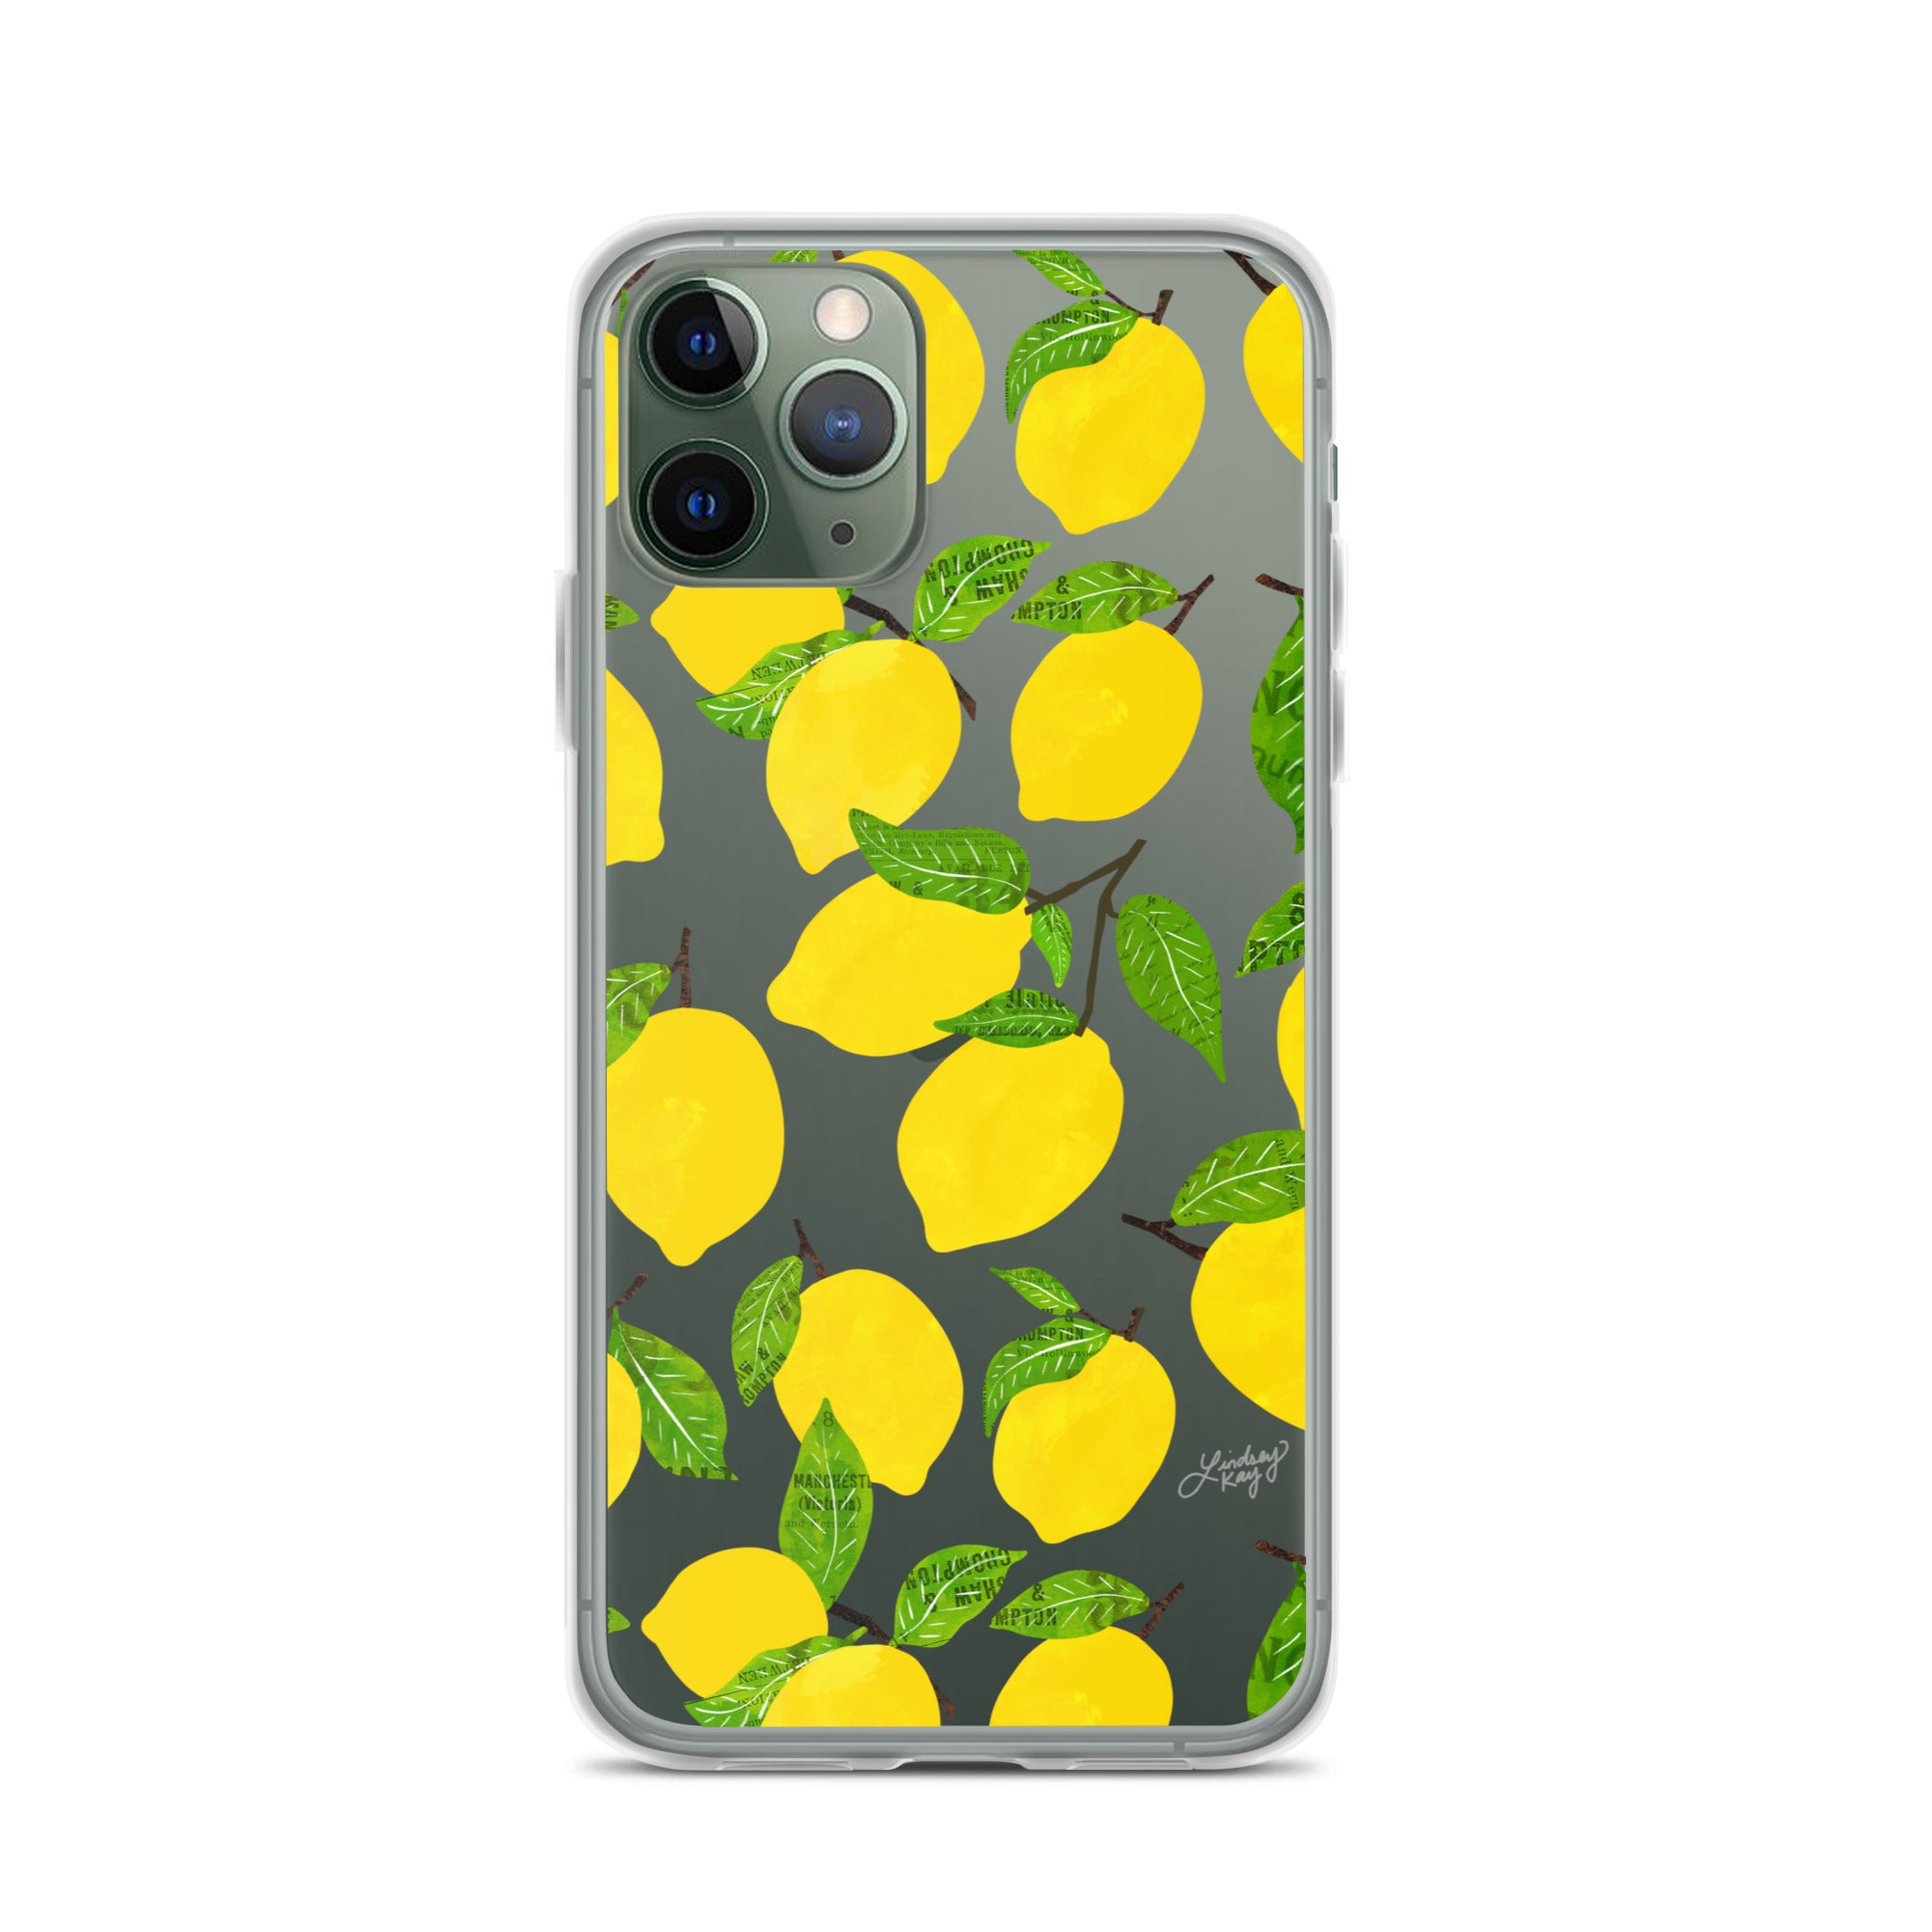 lemons illustration clear iphone case cover protector fruit summer yellow trendy cute lindsey kay collective